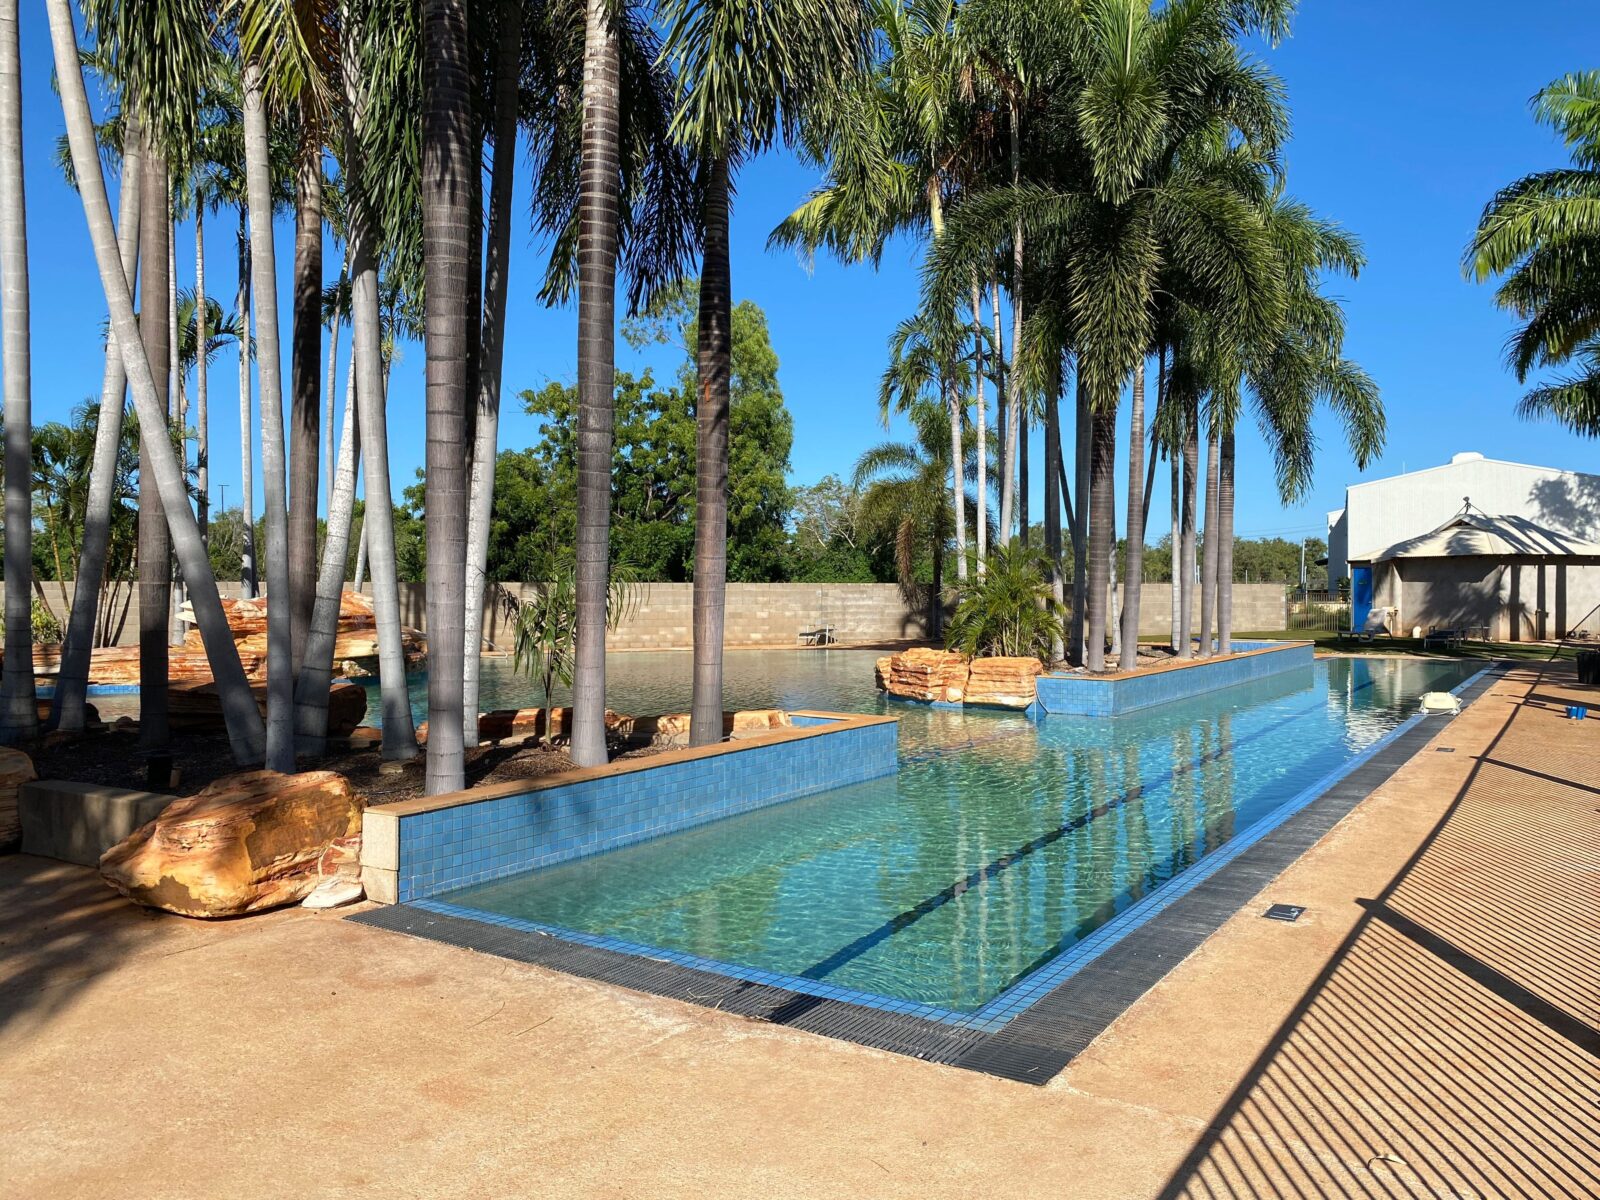 A landscape photo of a resort-style swimming lap pool surrounded by palm trees